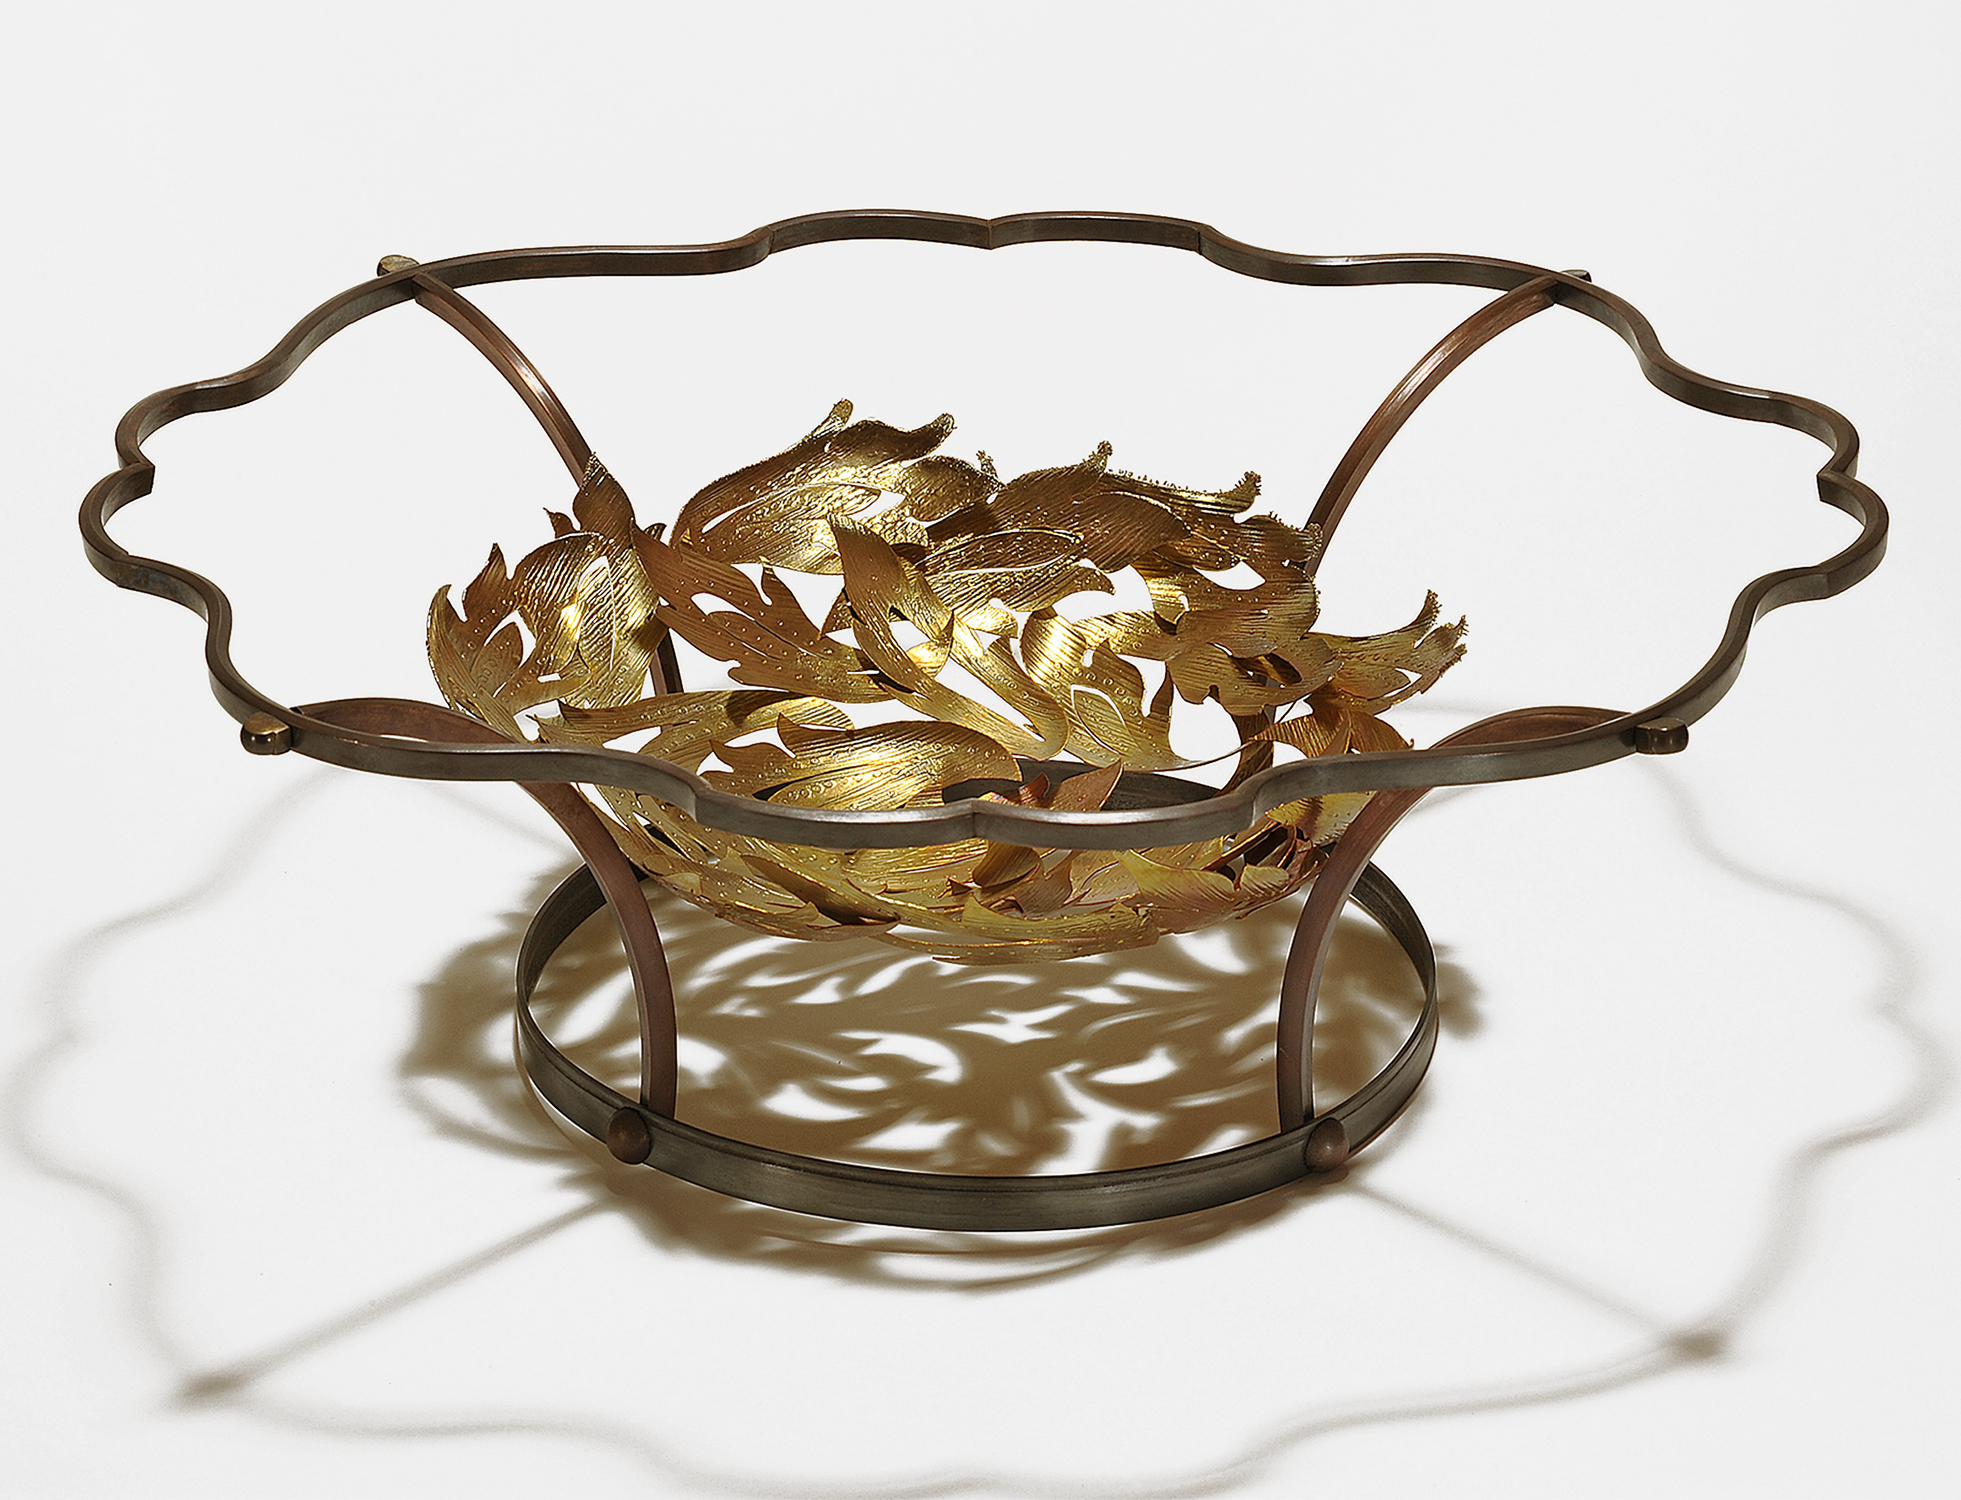 Offering  |  2012  |  brass, copper  |  5.25 x 16 x 16 inches